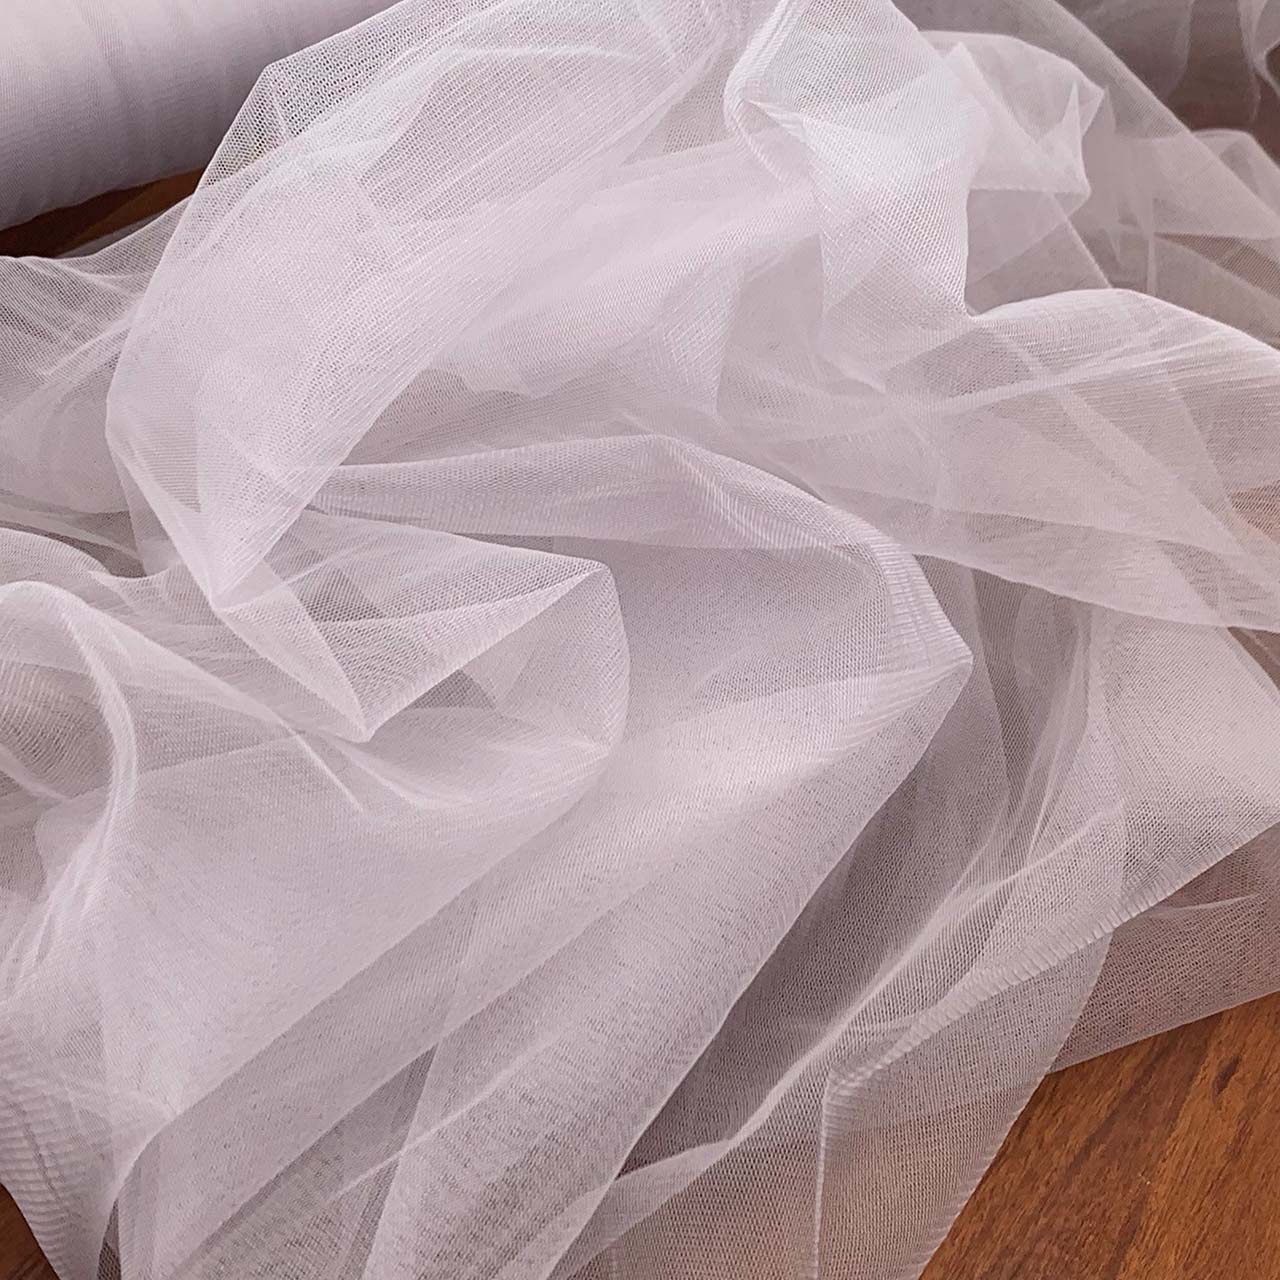 Bridal tulle veil tulle oyster fabric collection